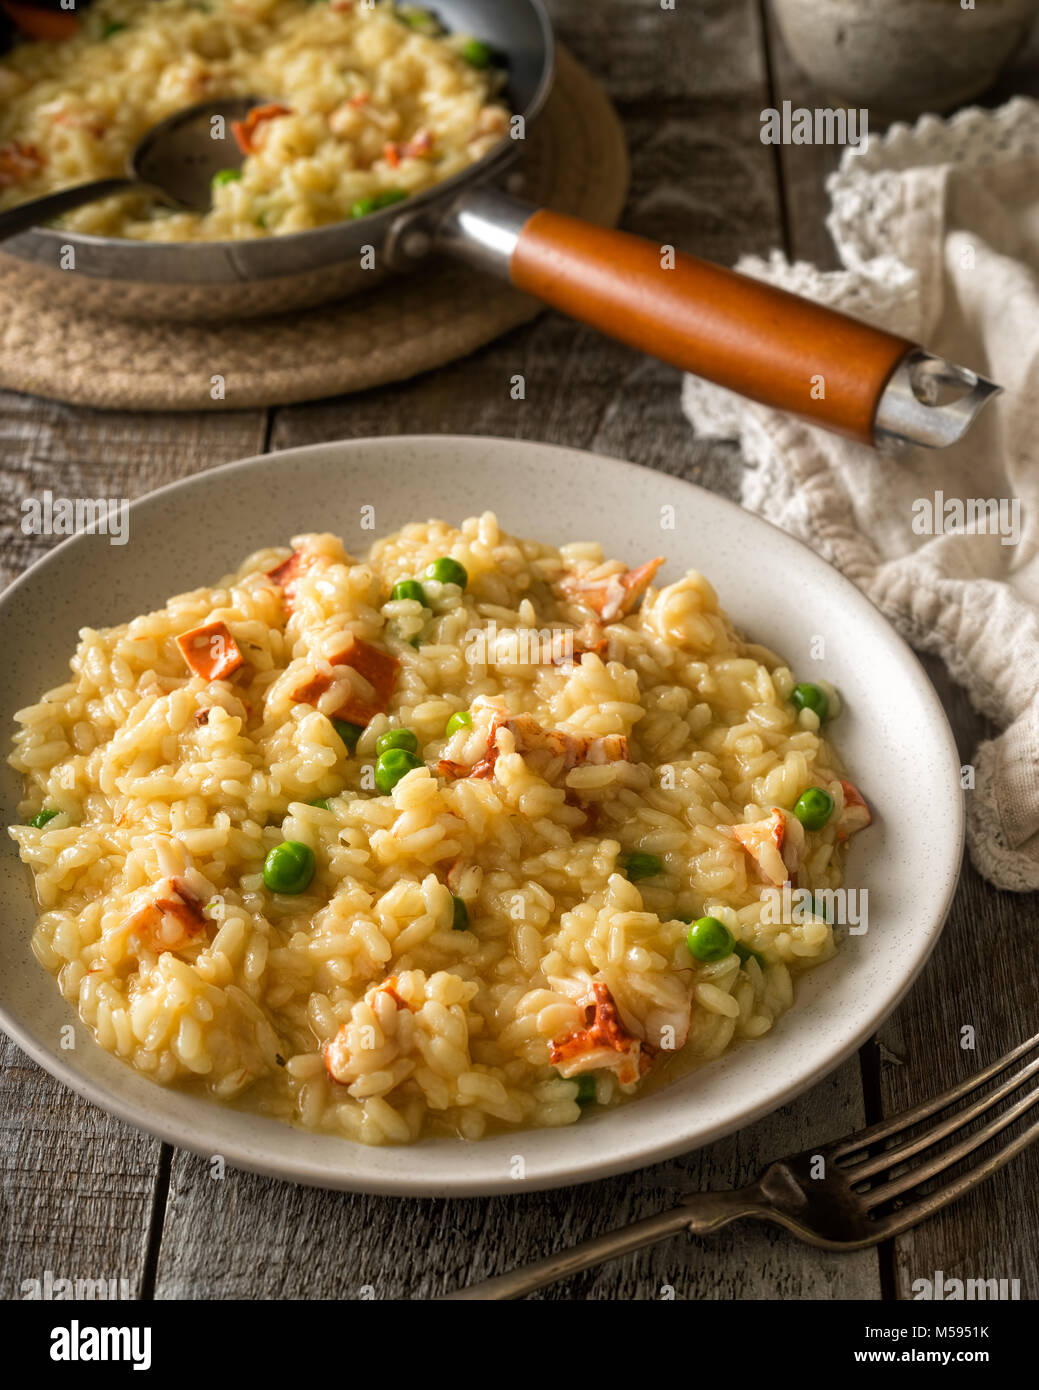 A plate of delicious homemade lobster risotto with green peas. Stock Photo